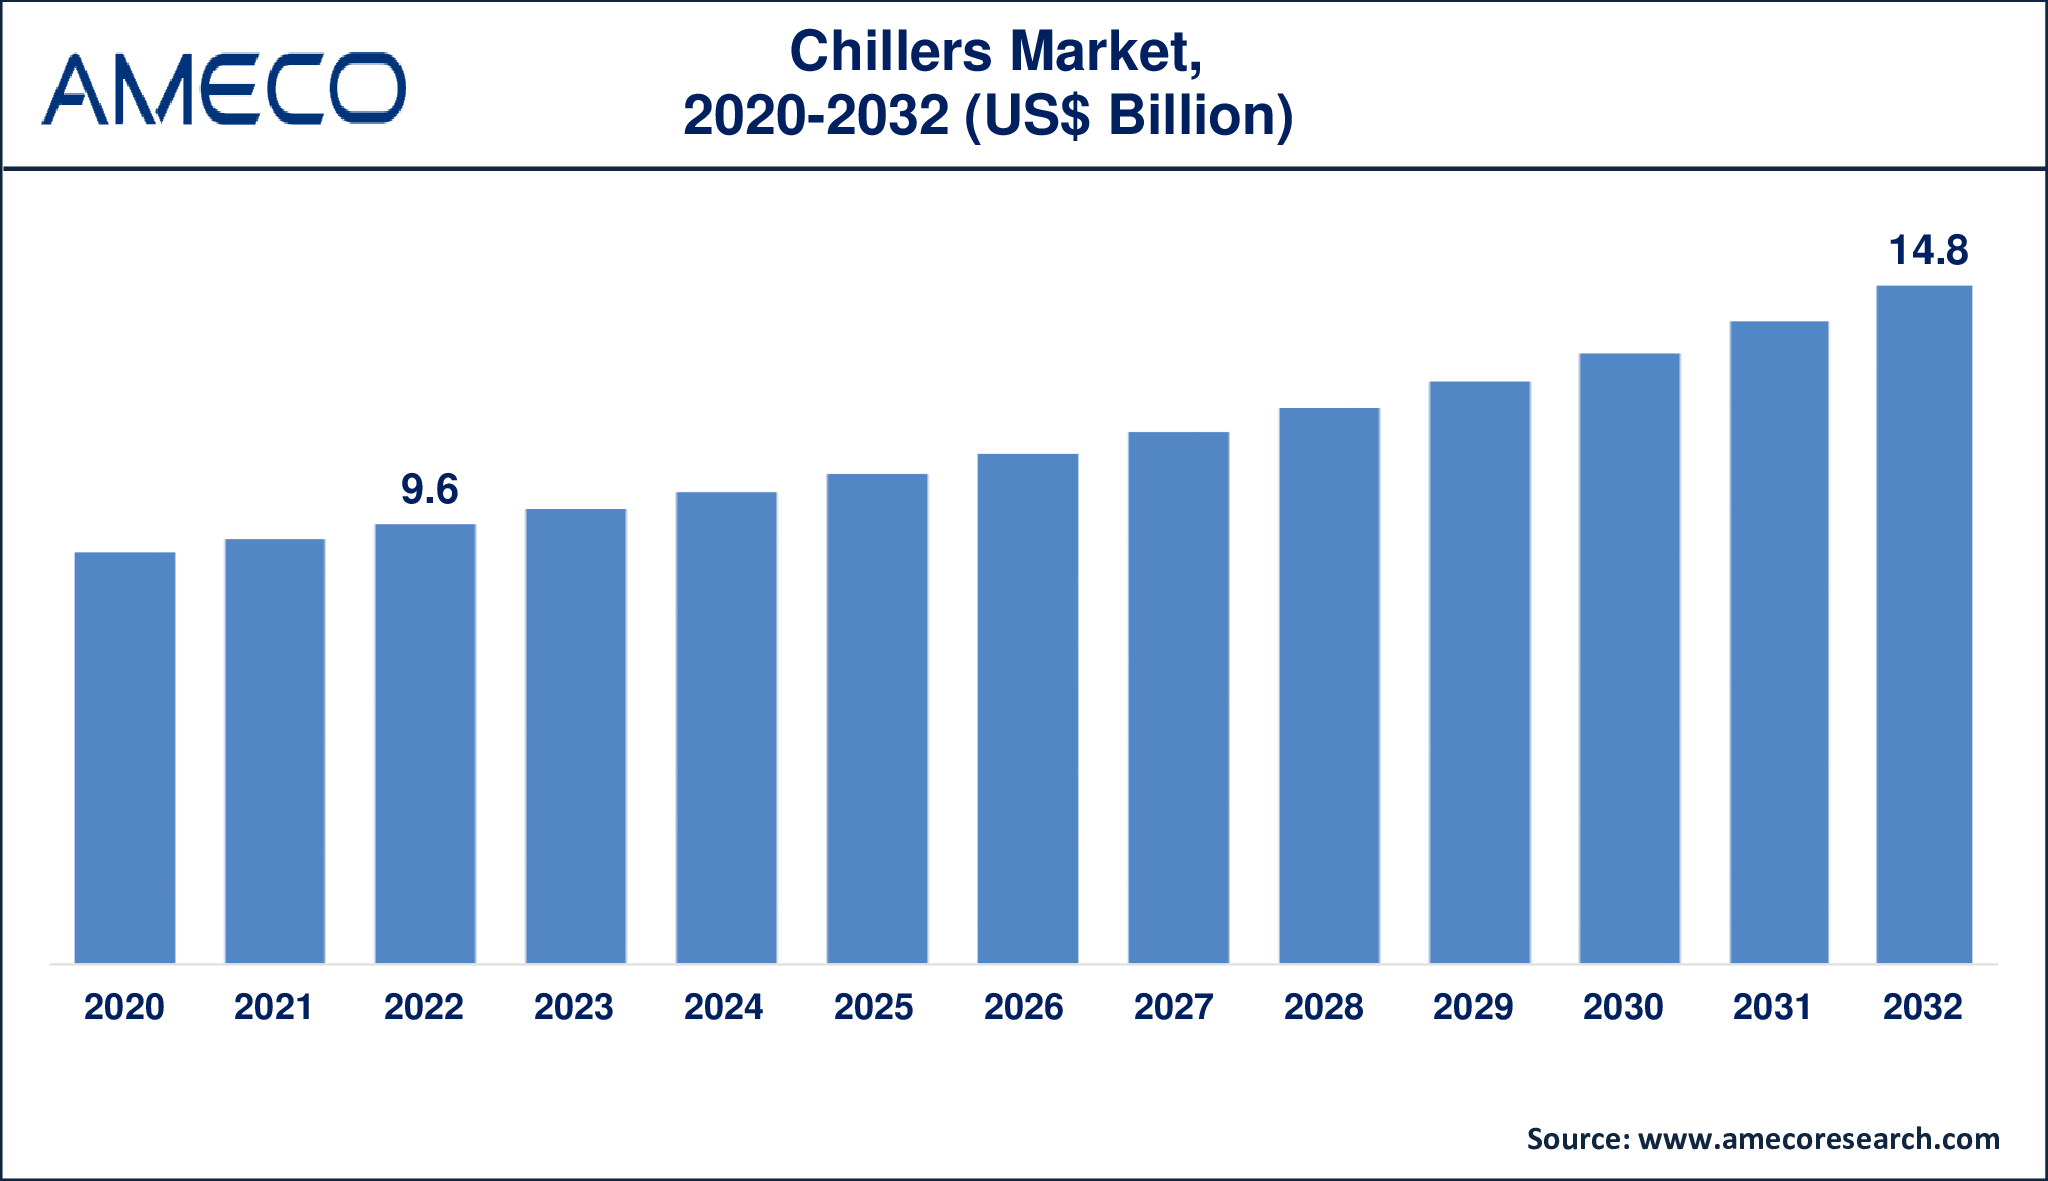 Chillers Market Dynamics